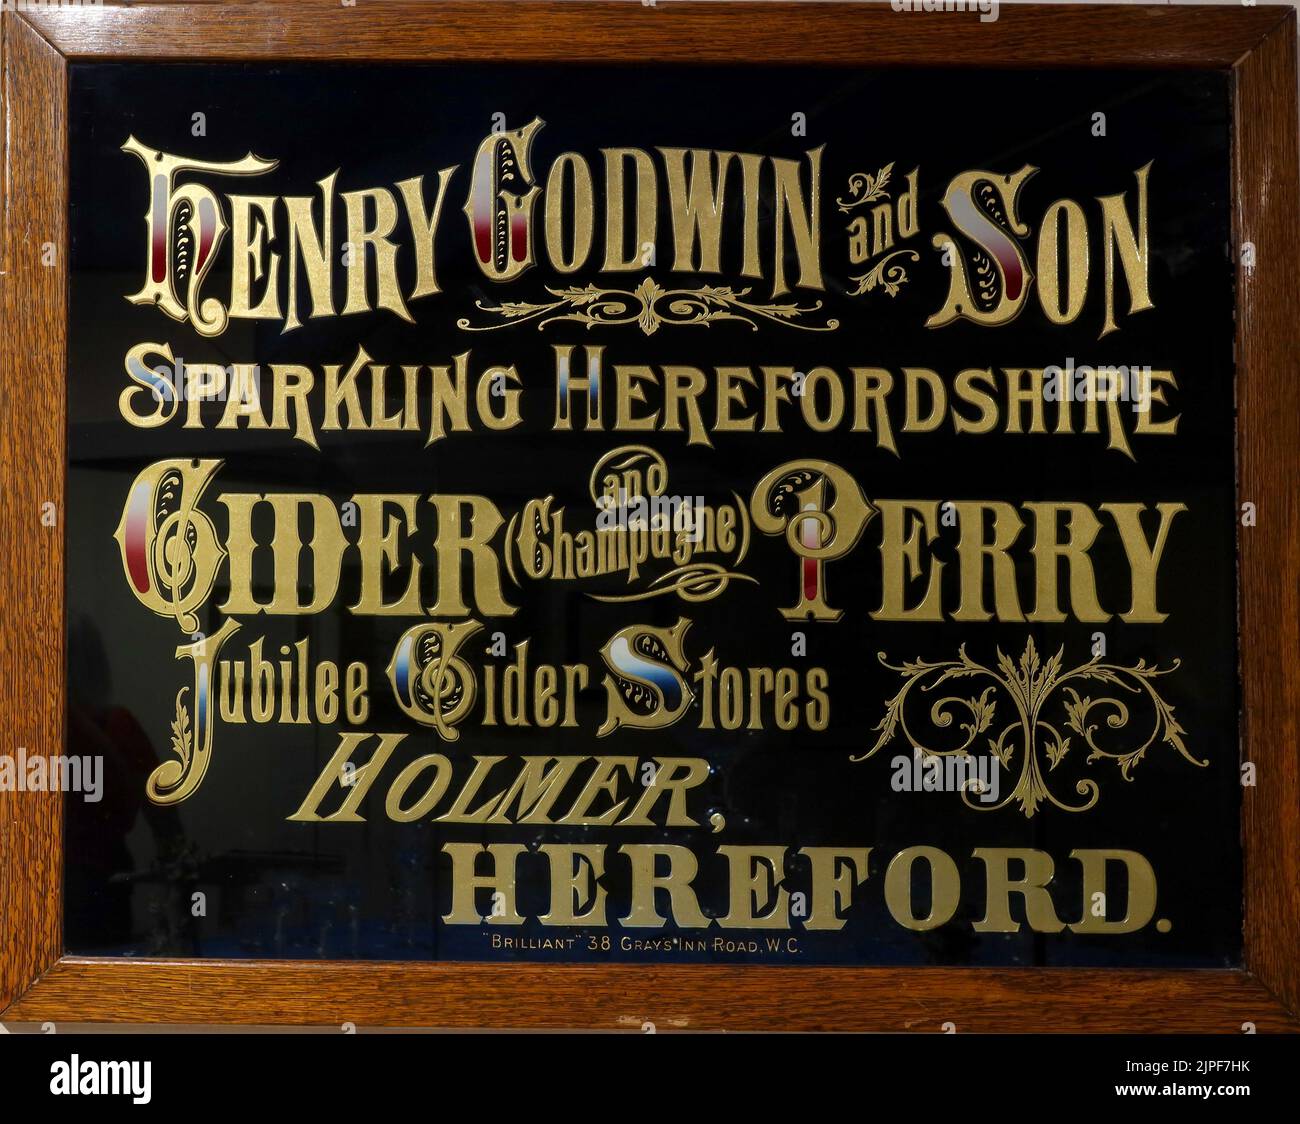 Pubblicità con cornice nera, Henry Godwin and Son, Herefordshire frizzante, Cider Champagne Perry, Jubilee Cider Stores, Holmer, Hereford, HR1 1LL Foto Stock